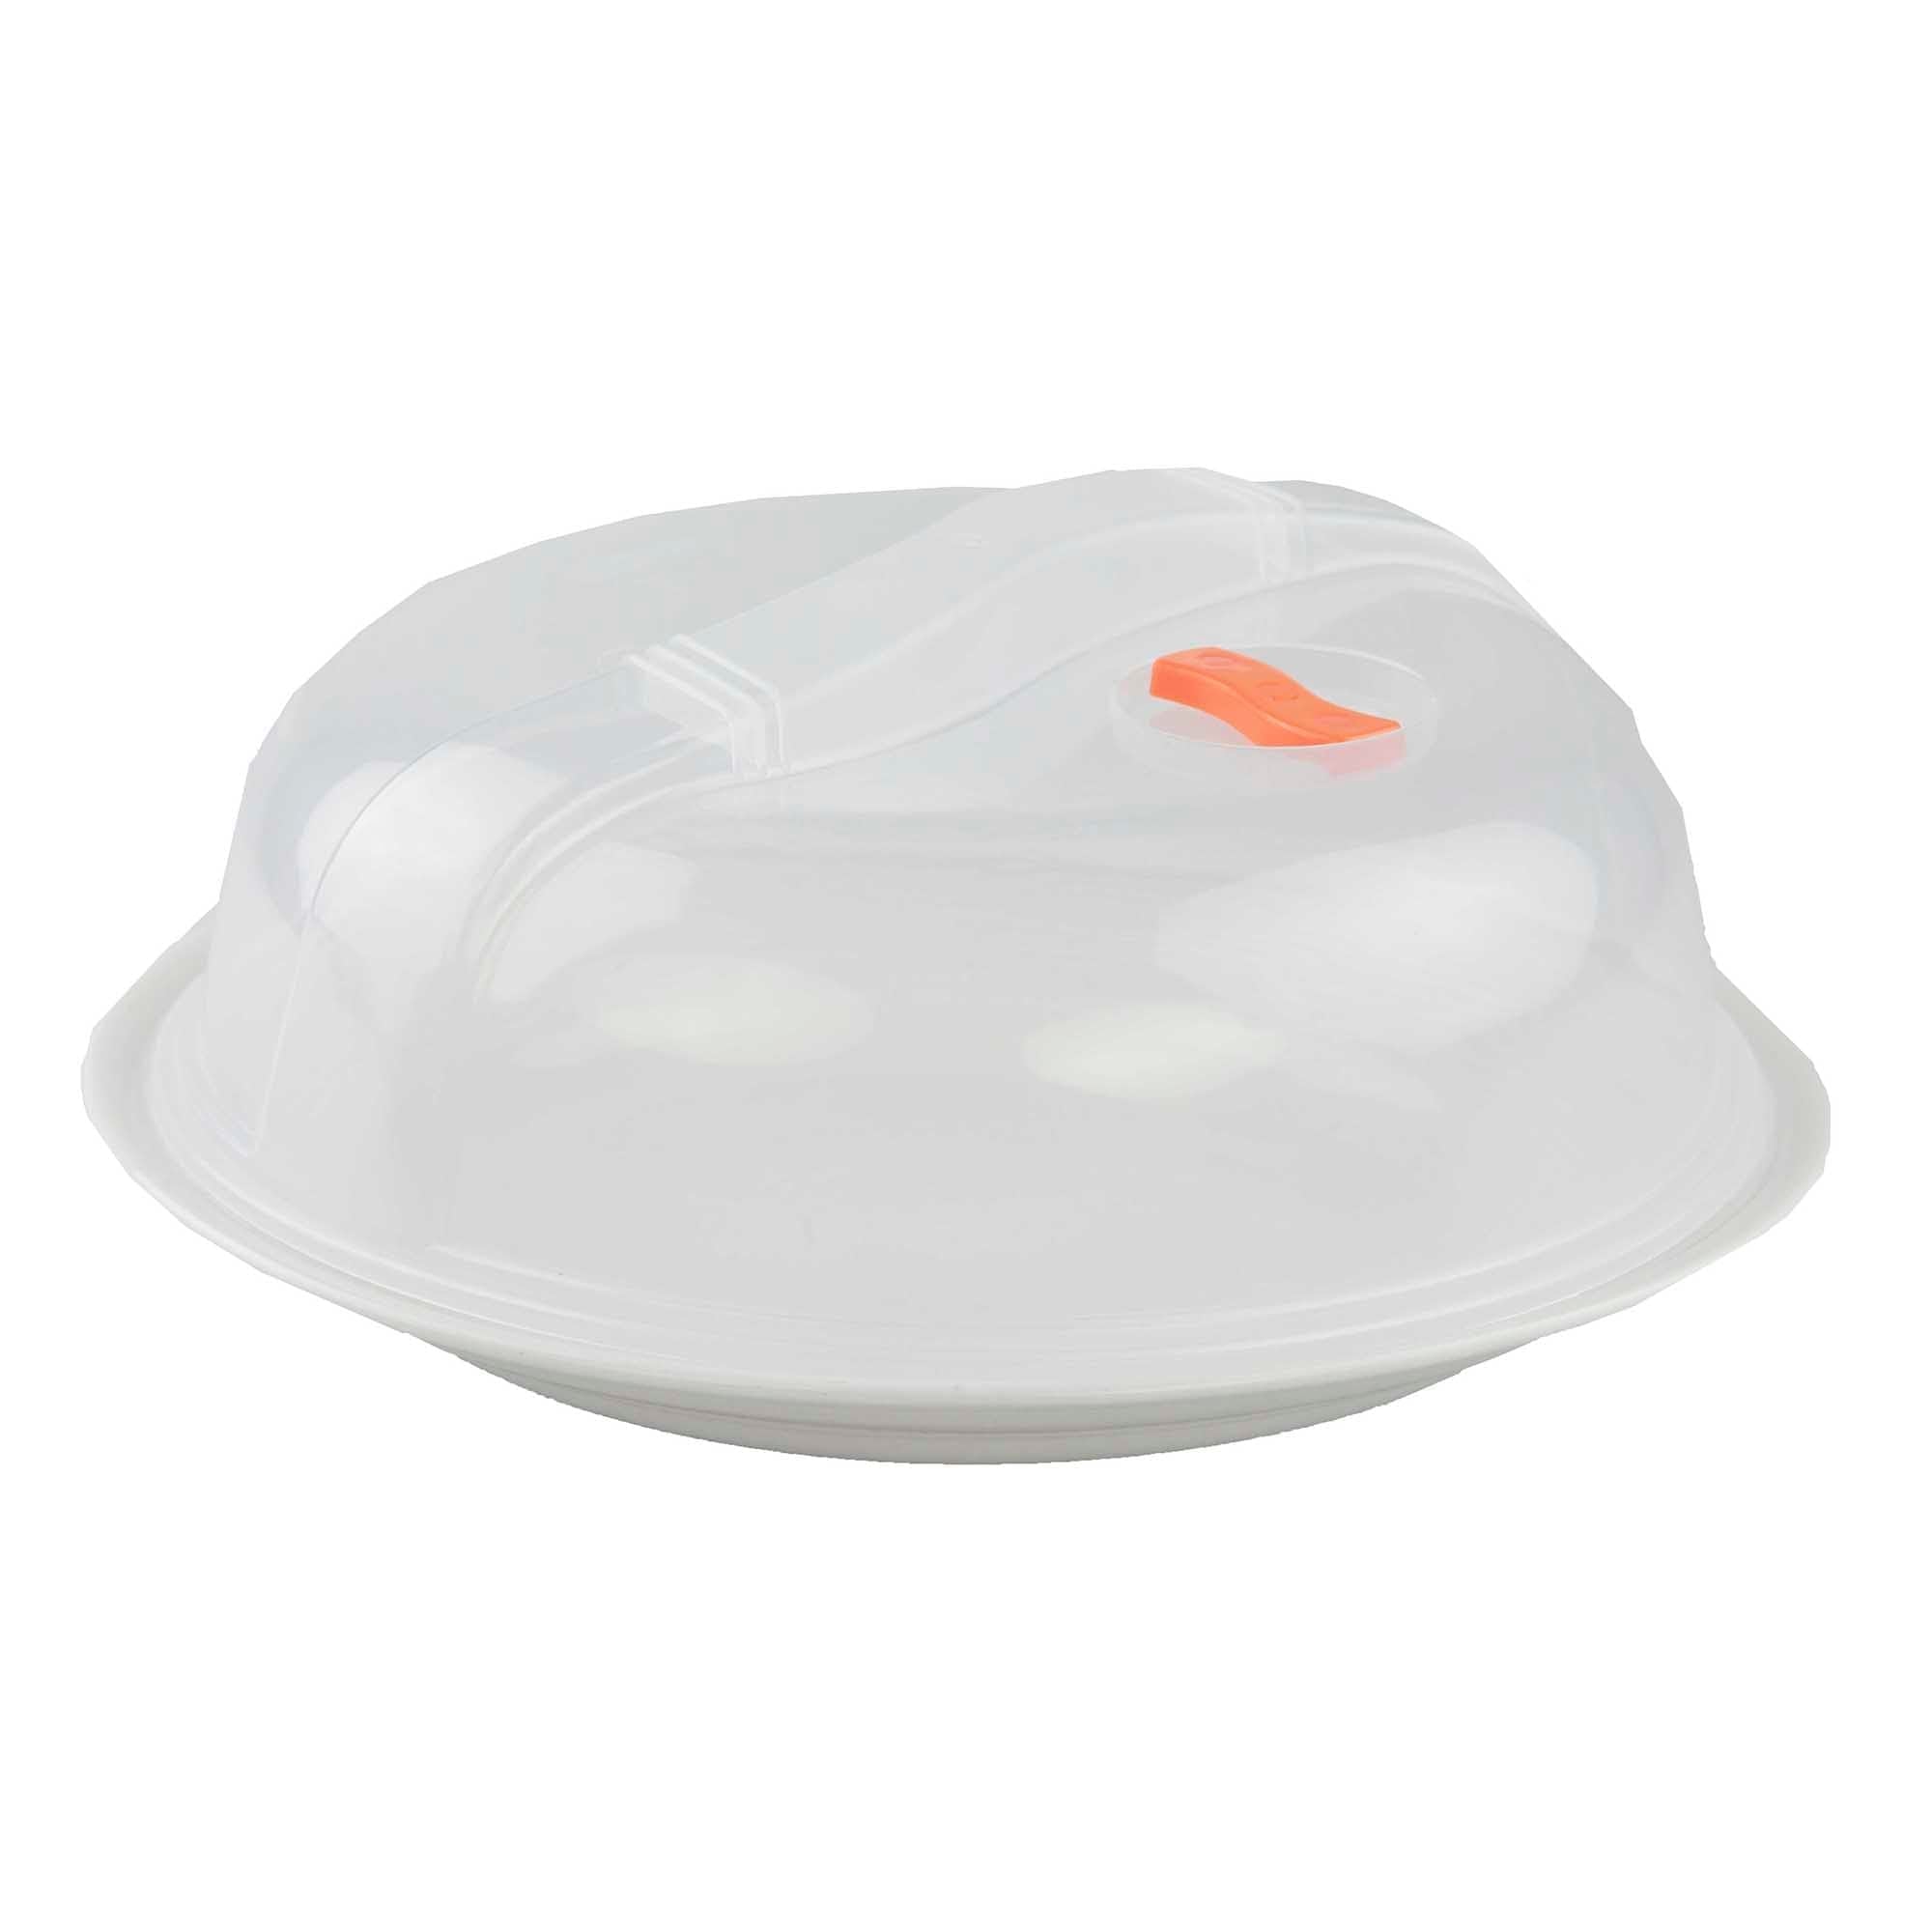 Plastic Microwave Plate Cover with Vent, FOOD PREP